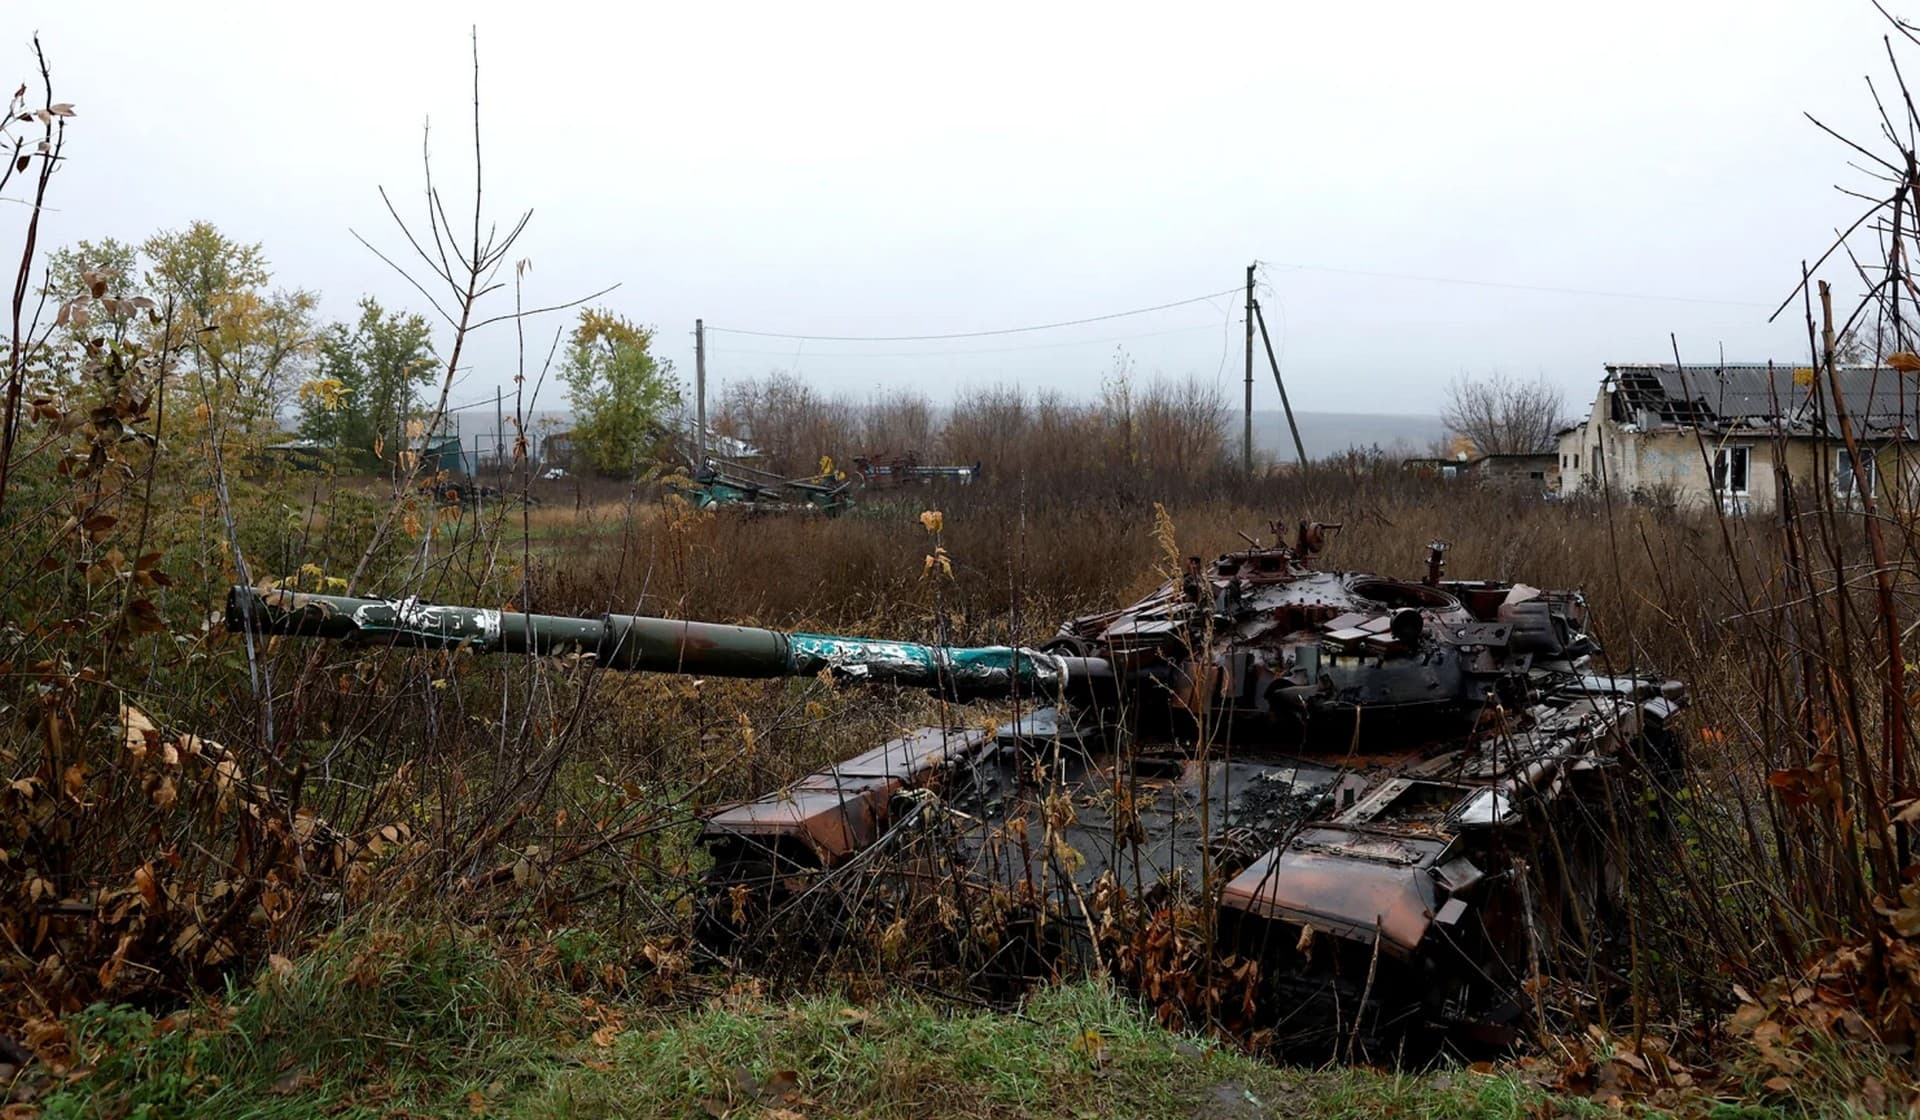 A destroyed tank in Tsupivka